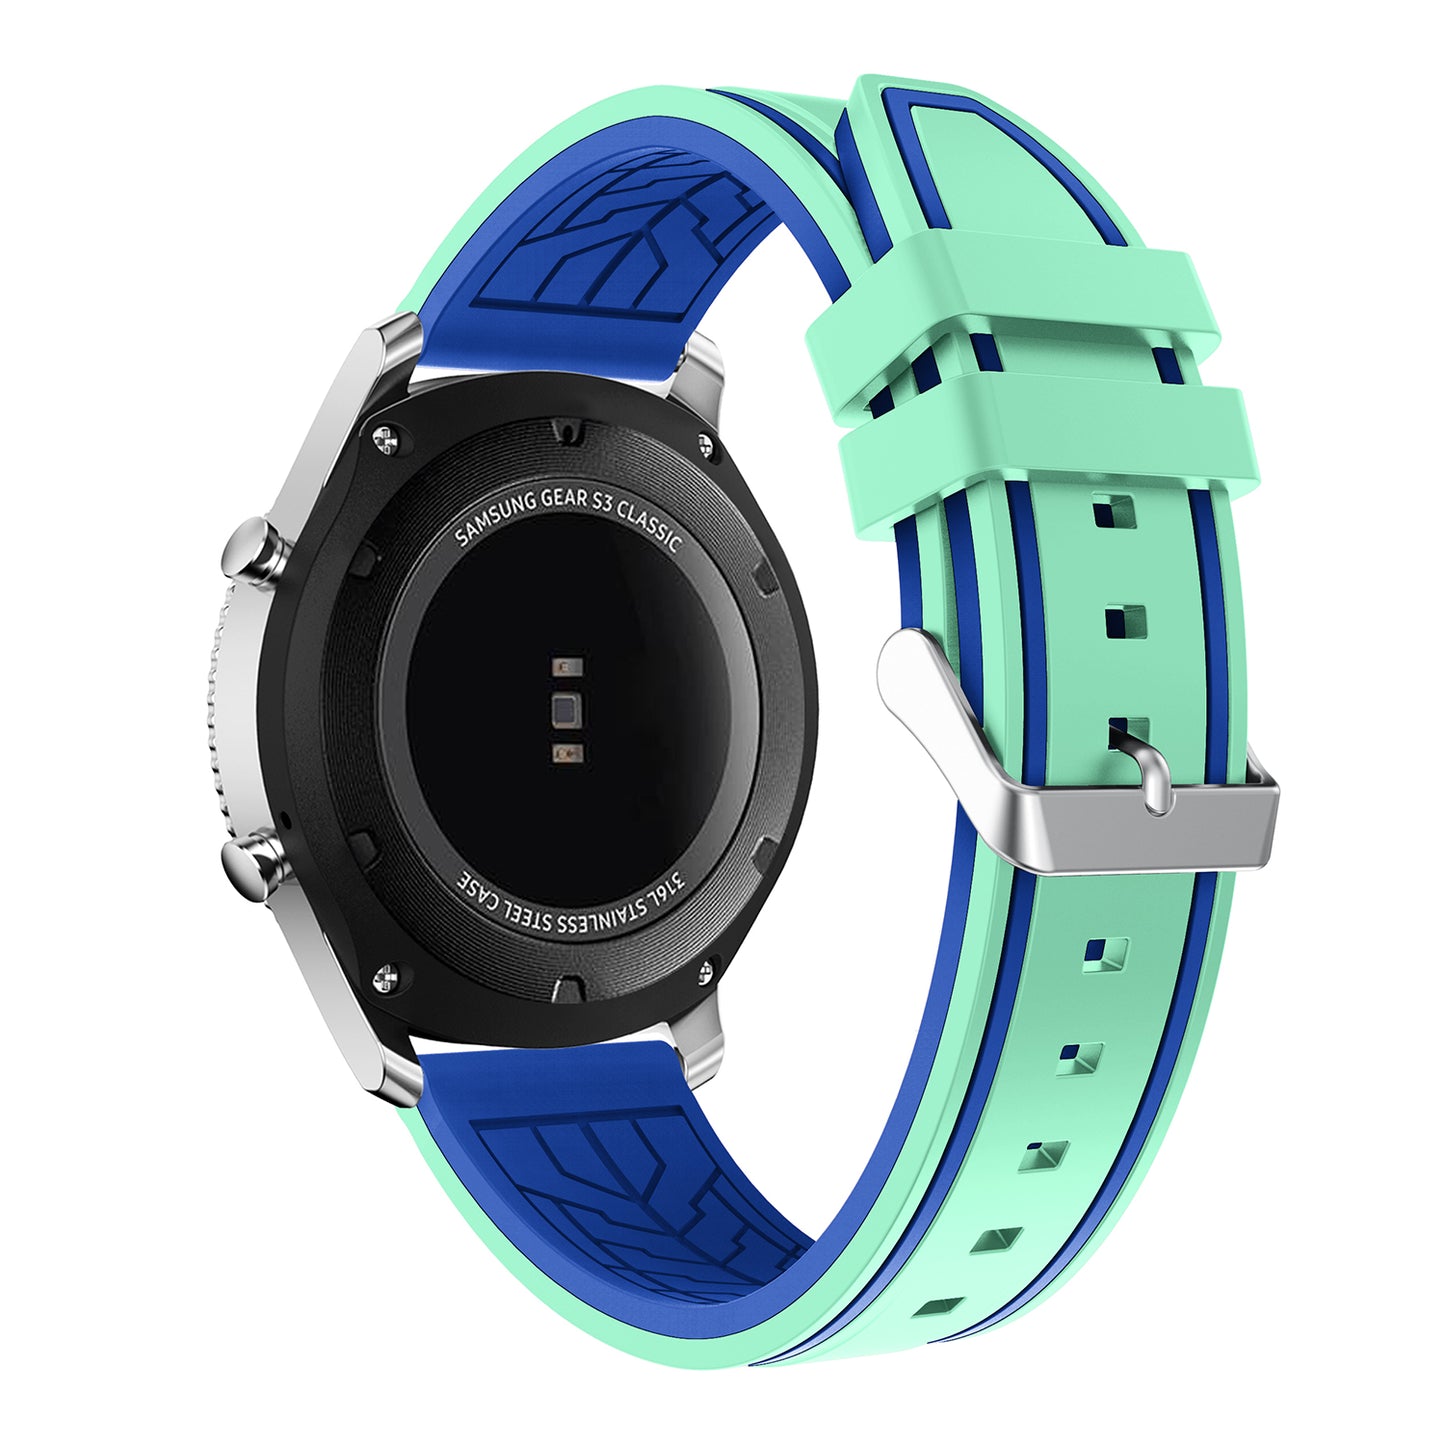 Rubber Strap for Samsung Gear S3 & Others